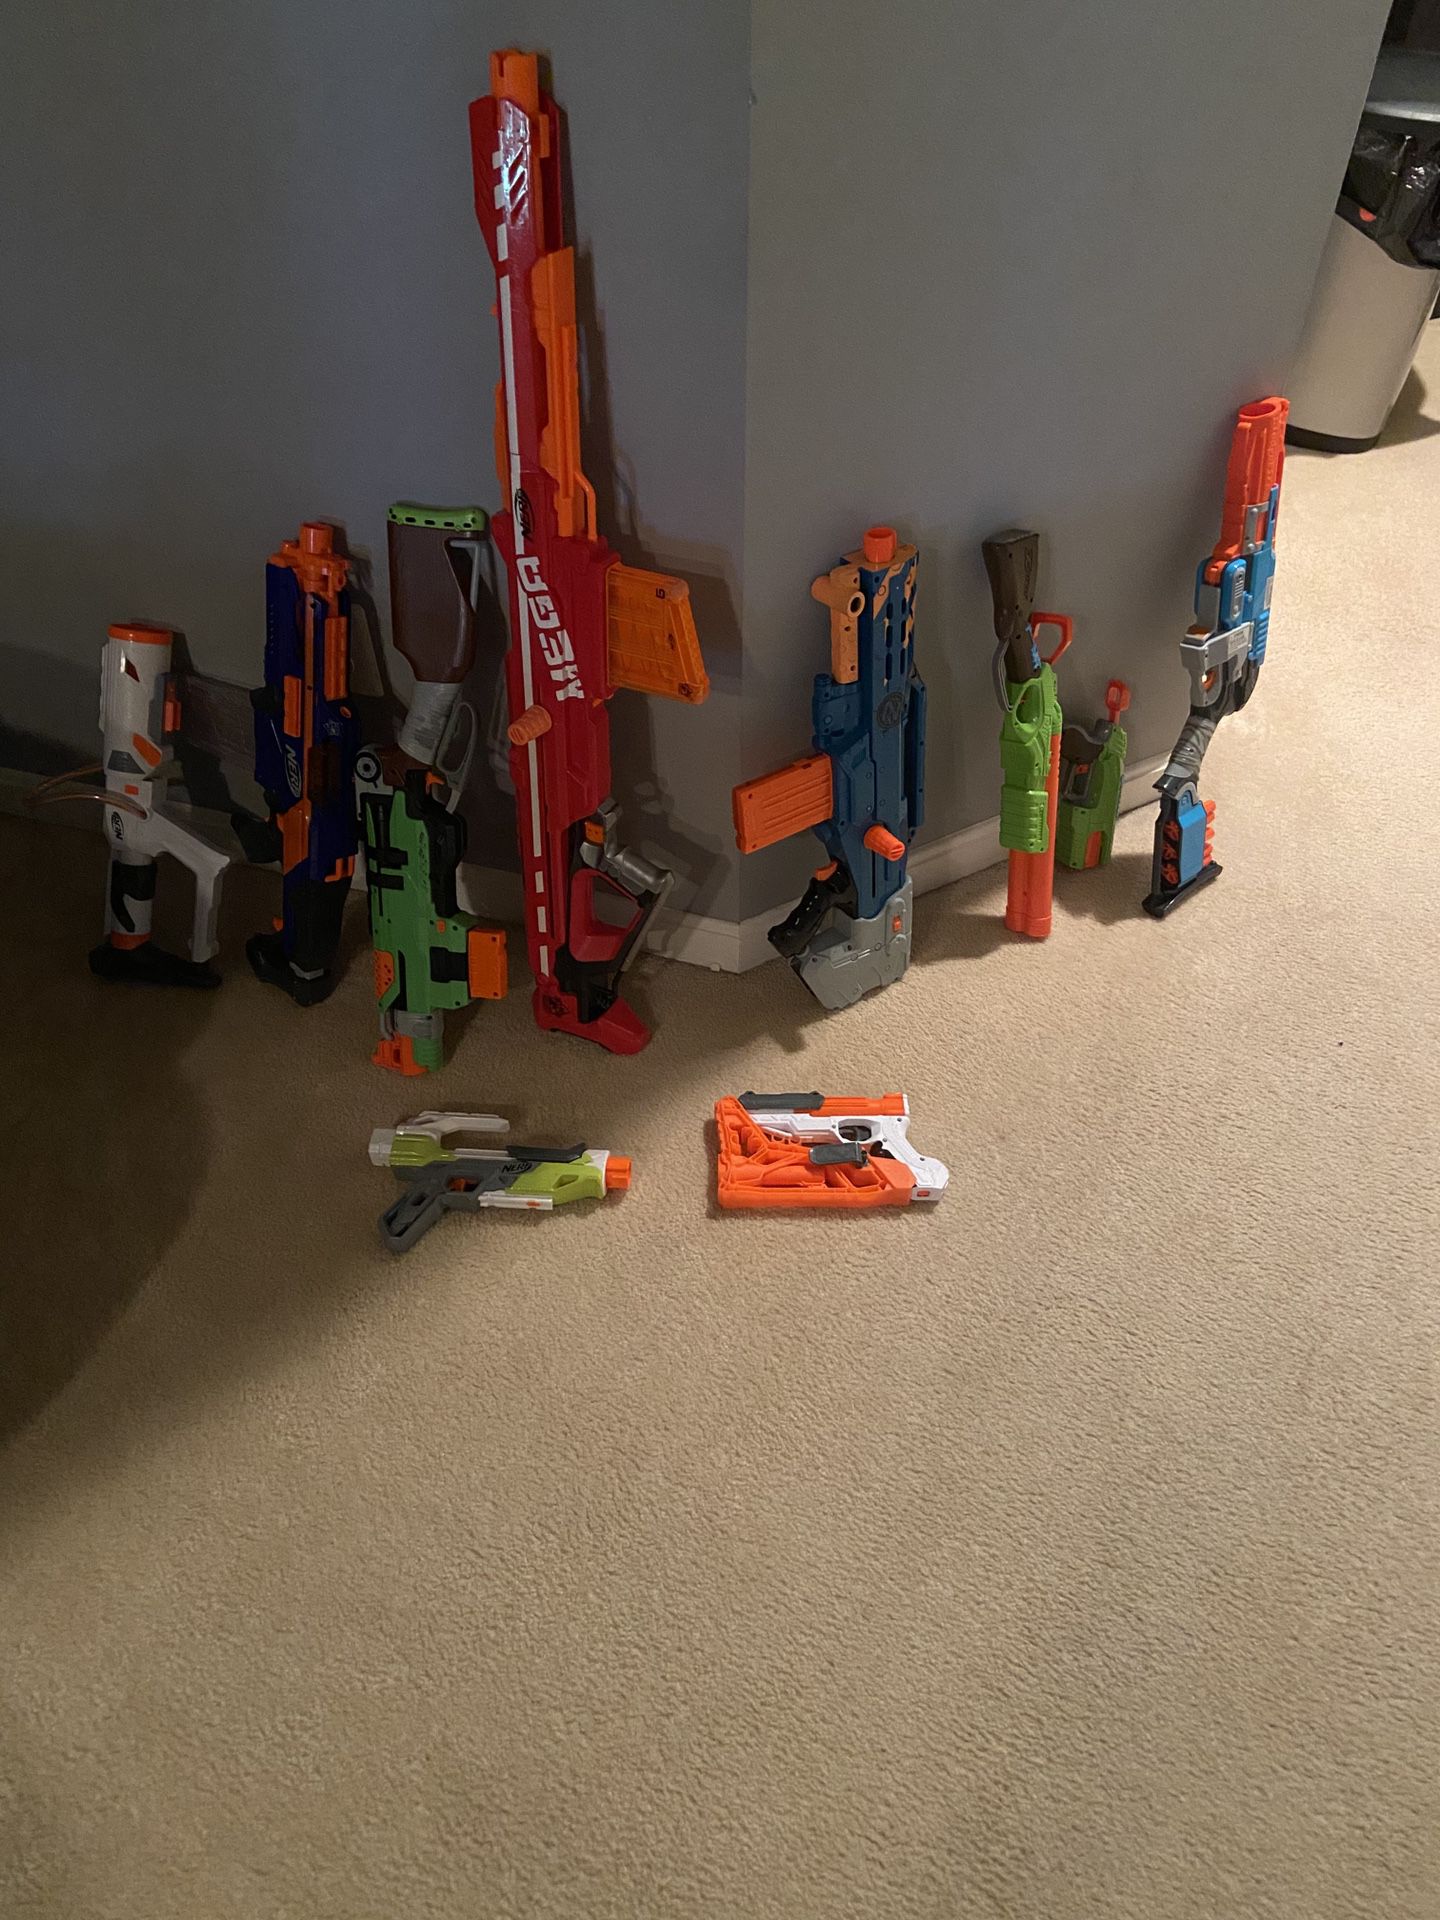 Nerf guns in good condition. Used 1 or 2 times. $80 or best offer